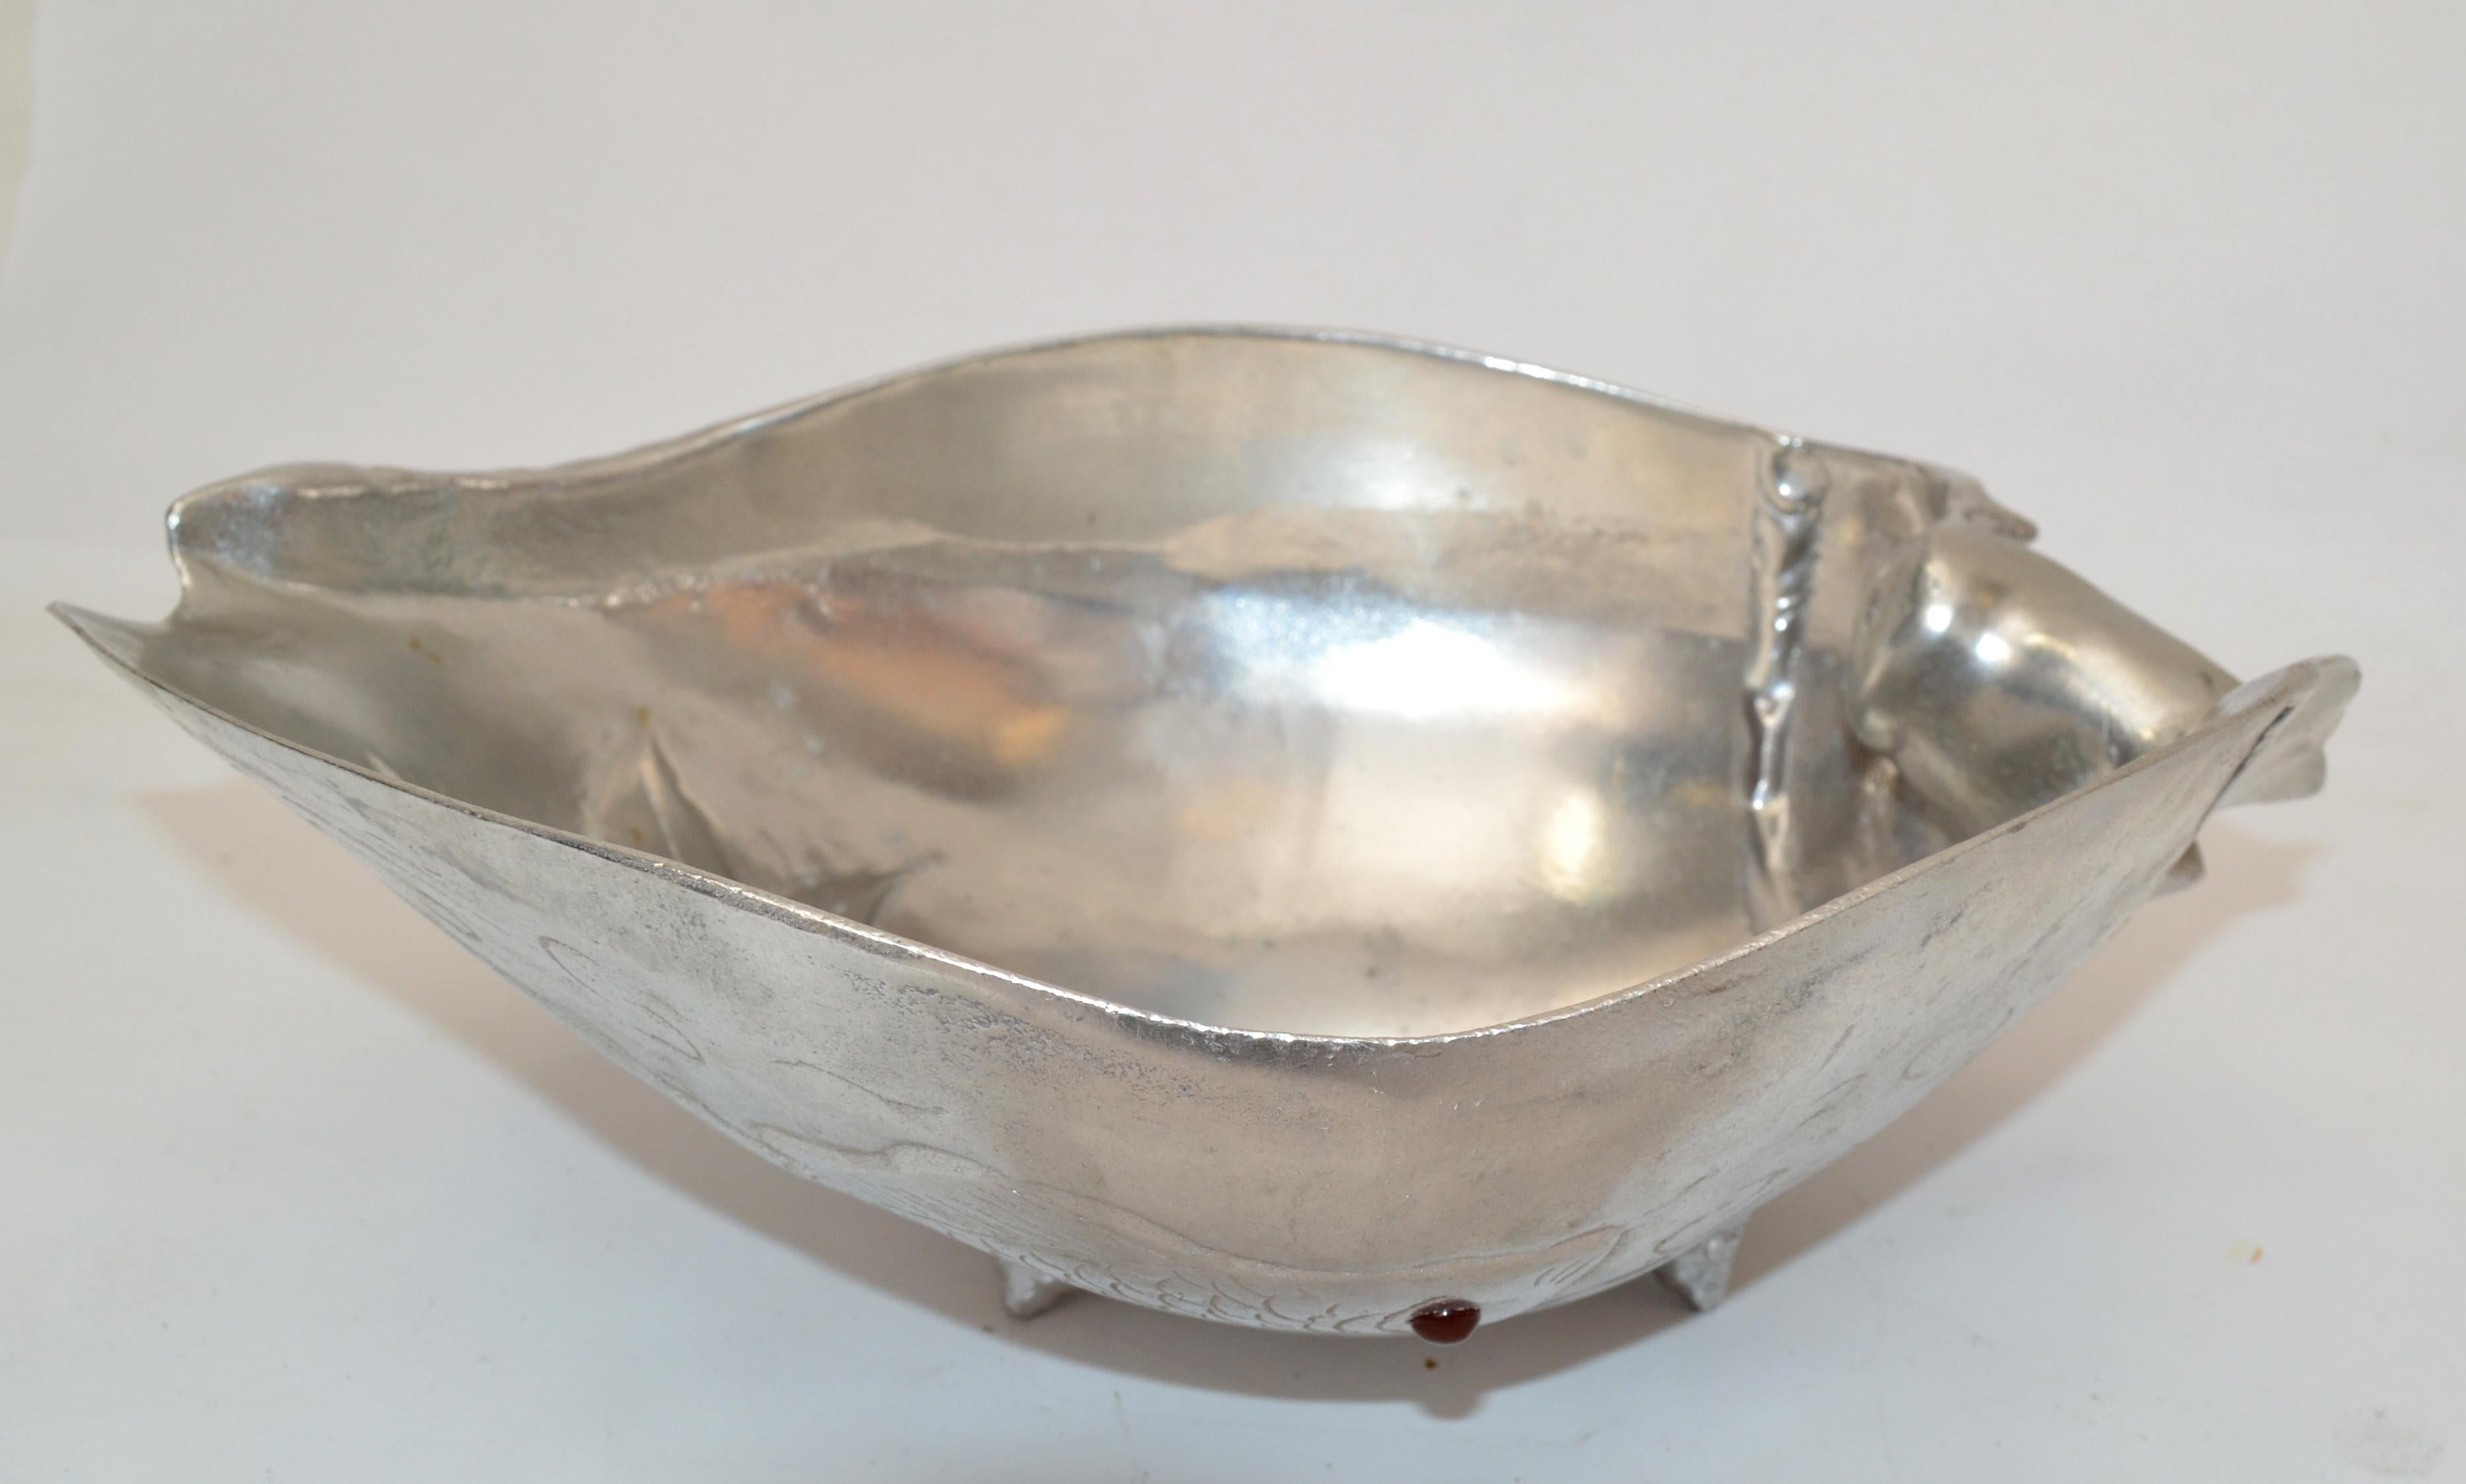 Arthur Court 1977 nautical 12 inches Aluminum Koi Fish Footed Shell Bowl with red Carnelian Eye.
A rare vintage aluminum Arthur Court serving bowl in the shape of a seashell with polished red stone eye. Scale-like decoration incised across